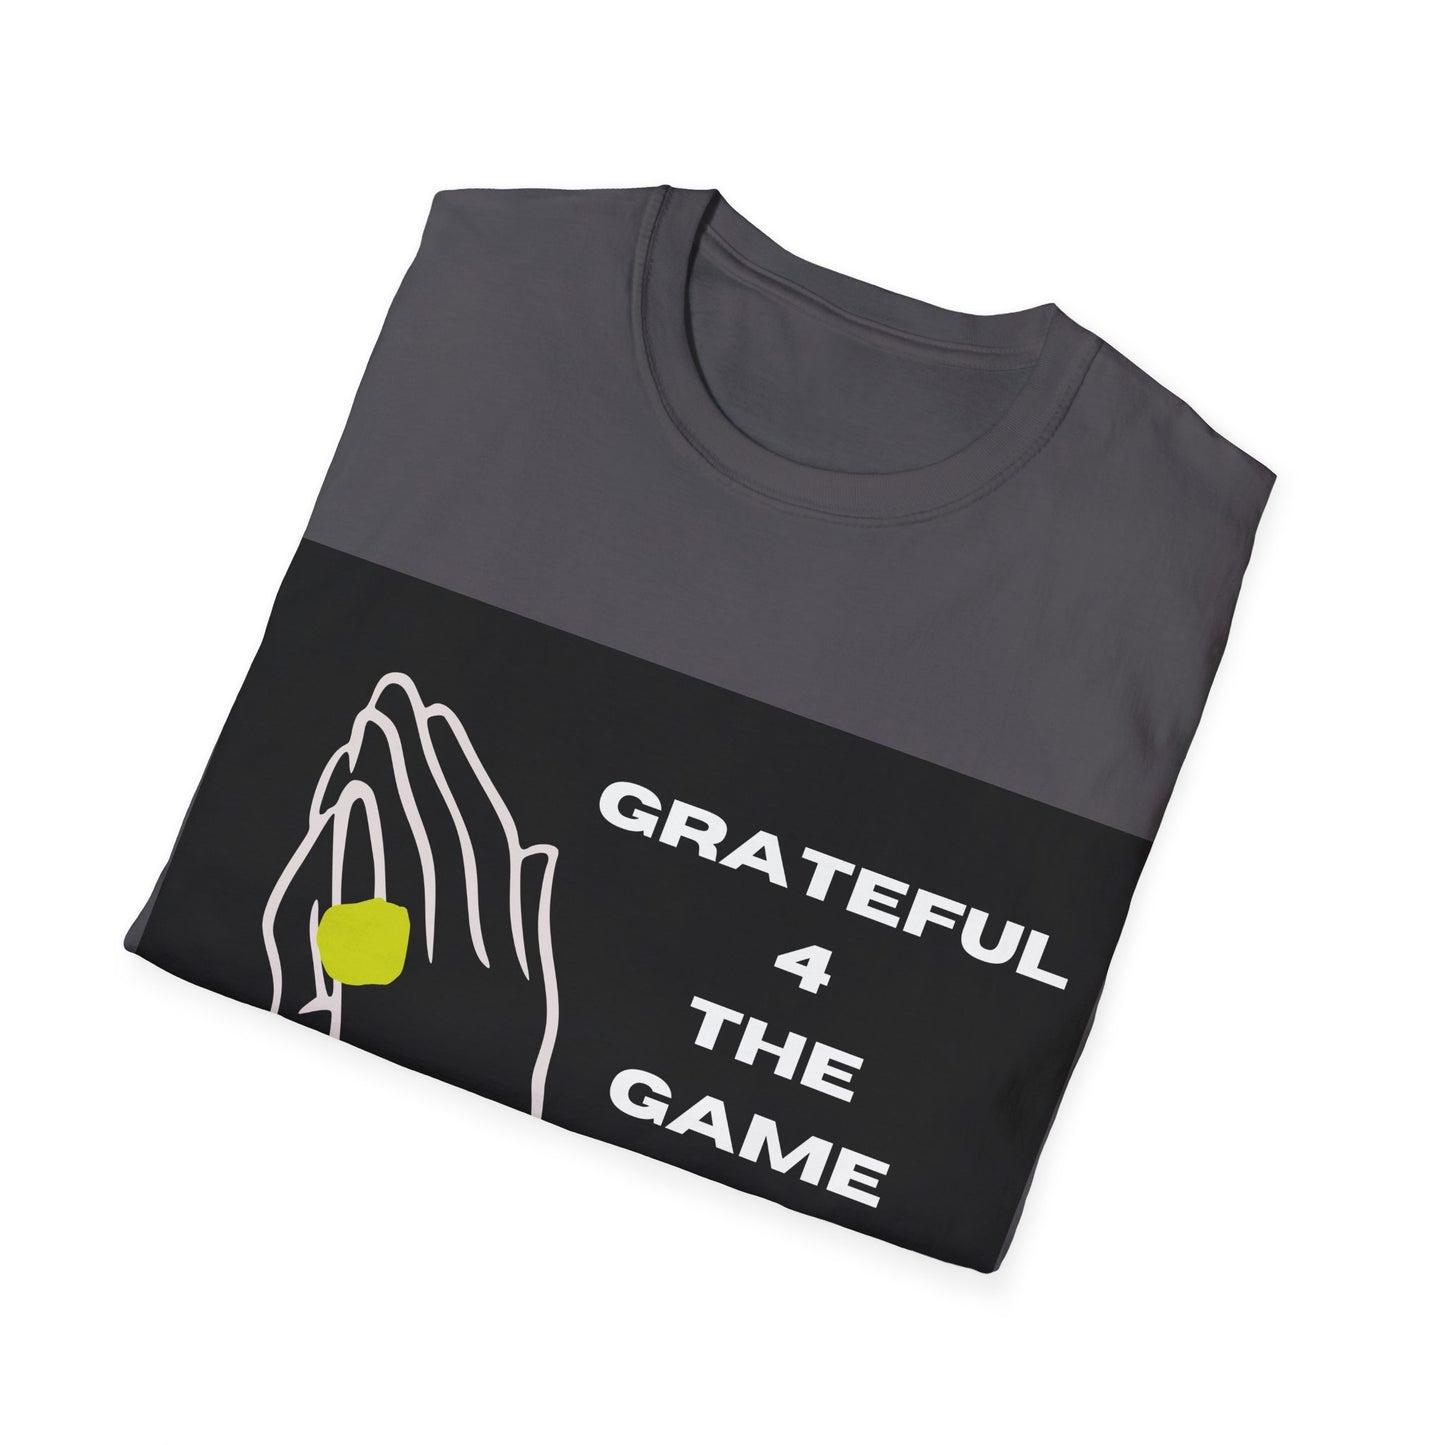 Grateful 4 The Game tee